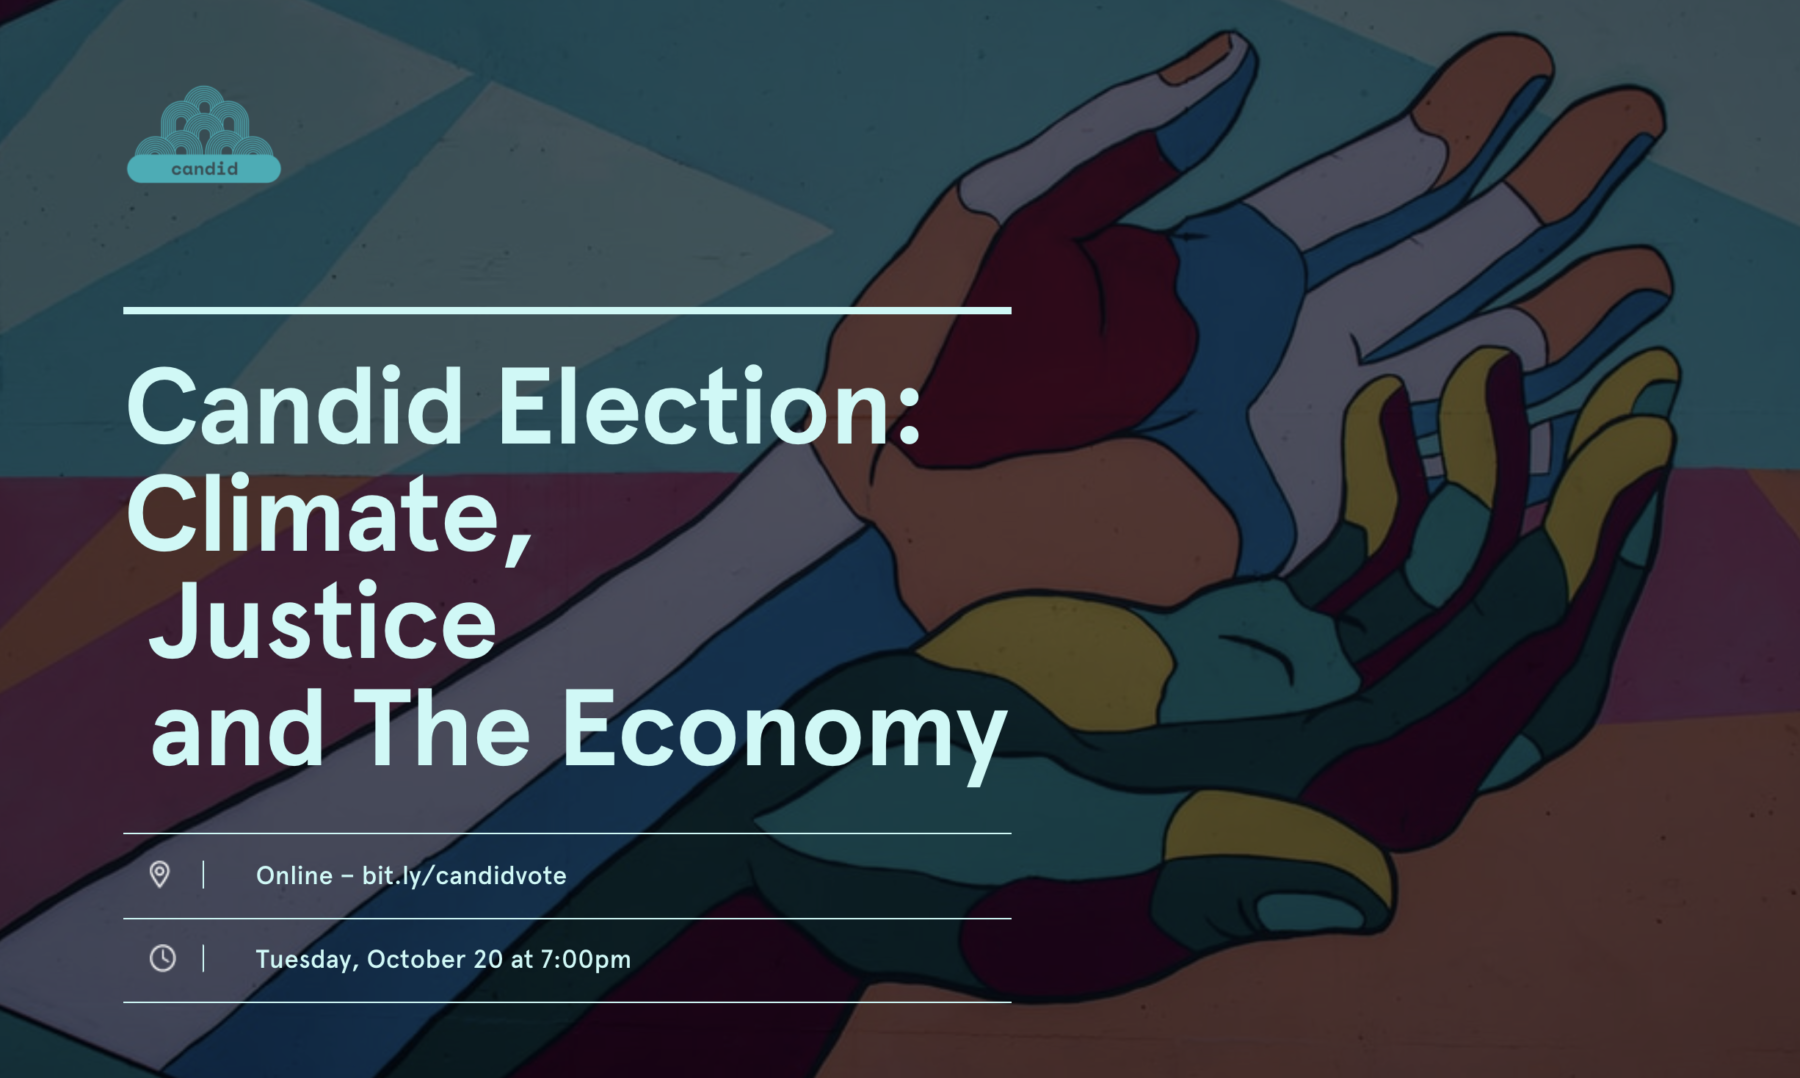 Tonight! Candid Election: Climate, Justice and The Economy 2